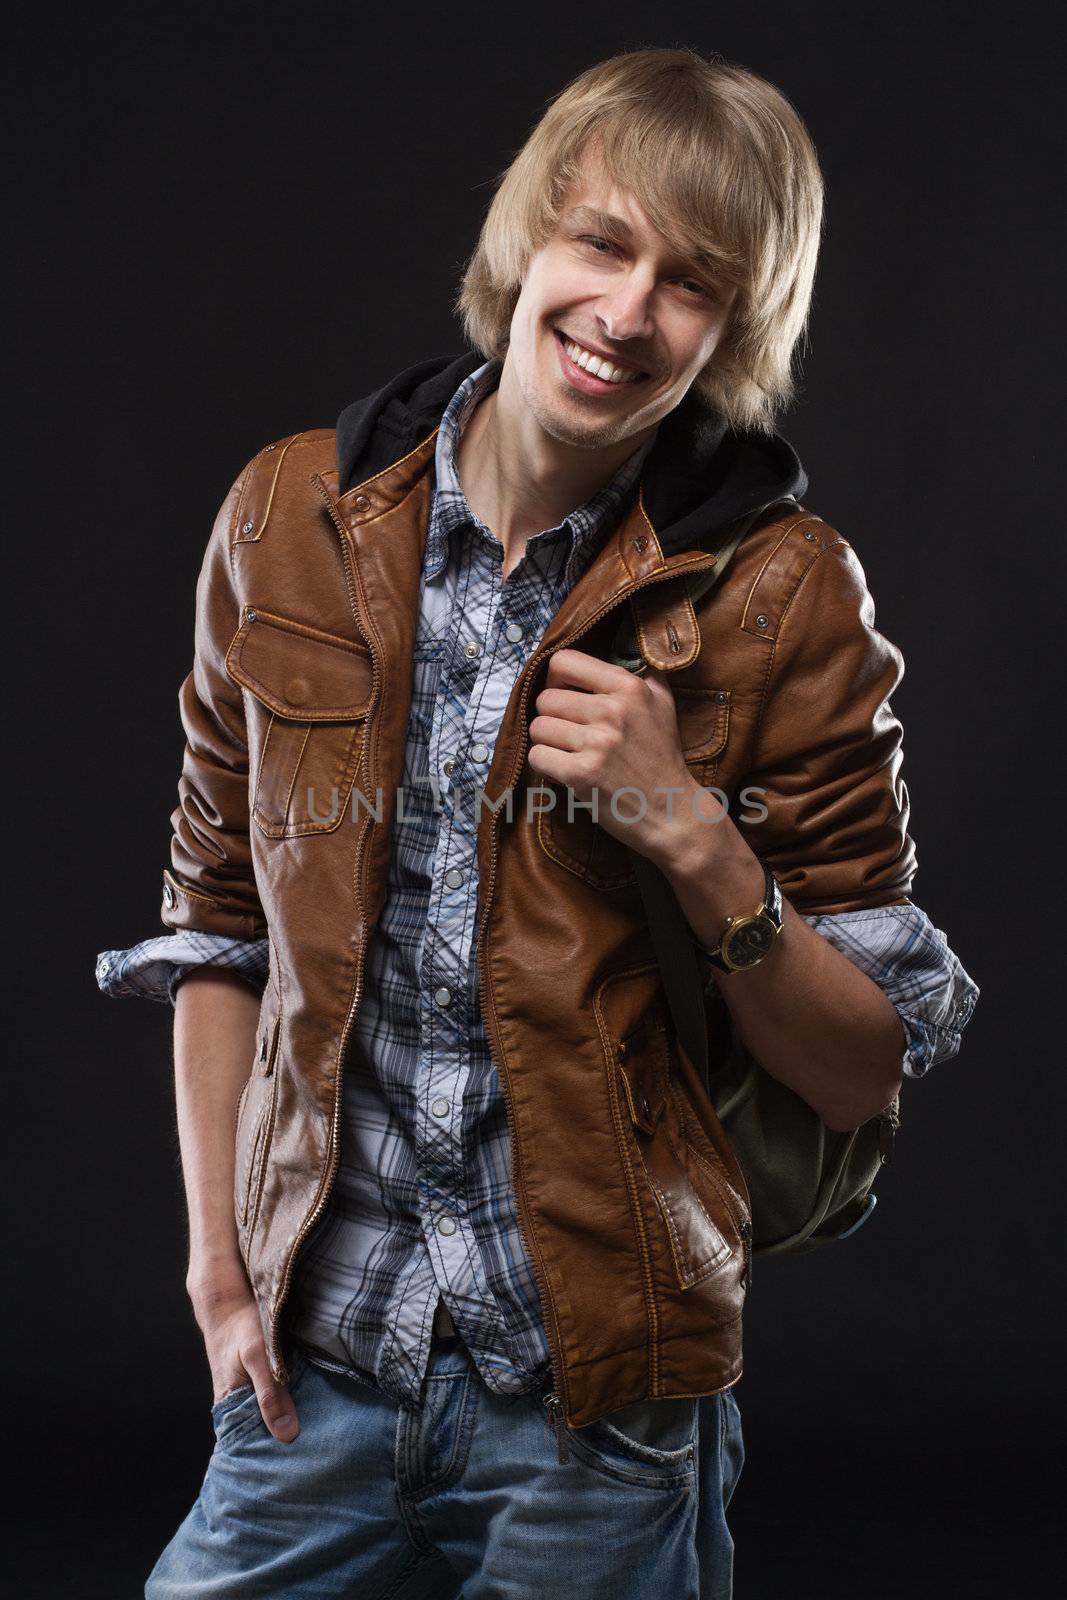 Handsome young man in leather jacket, studio portrait